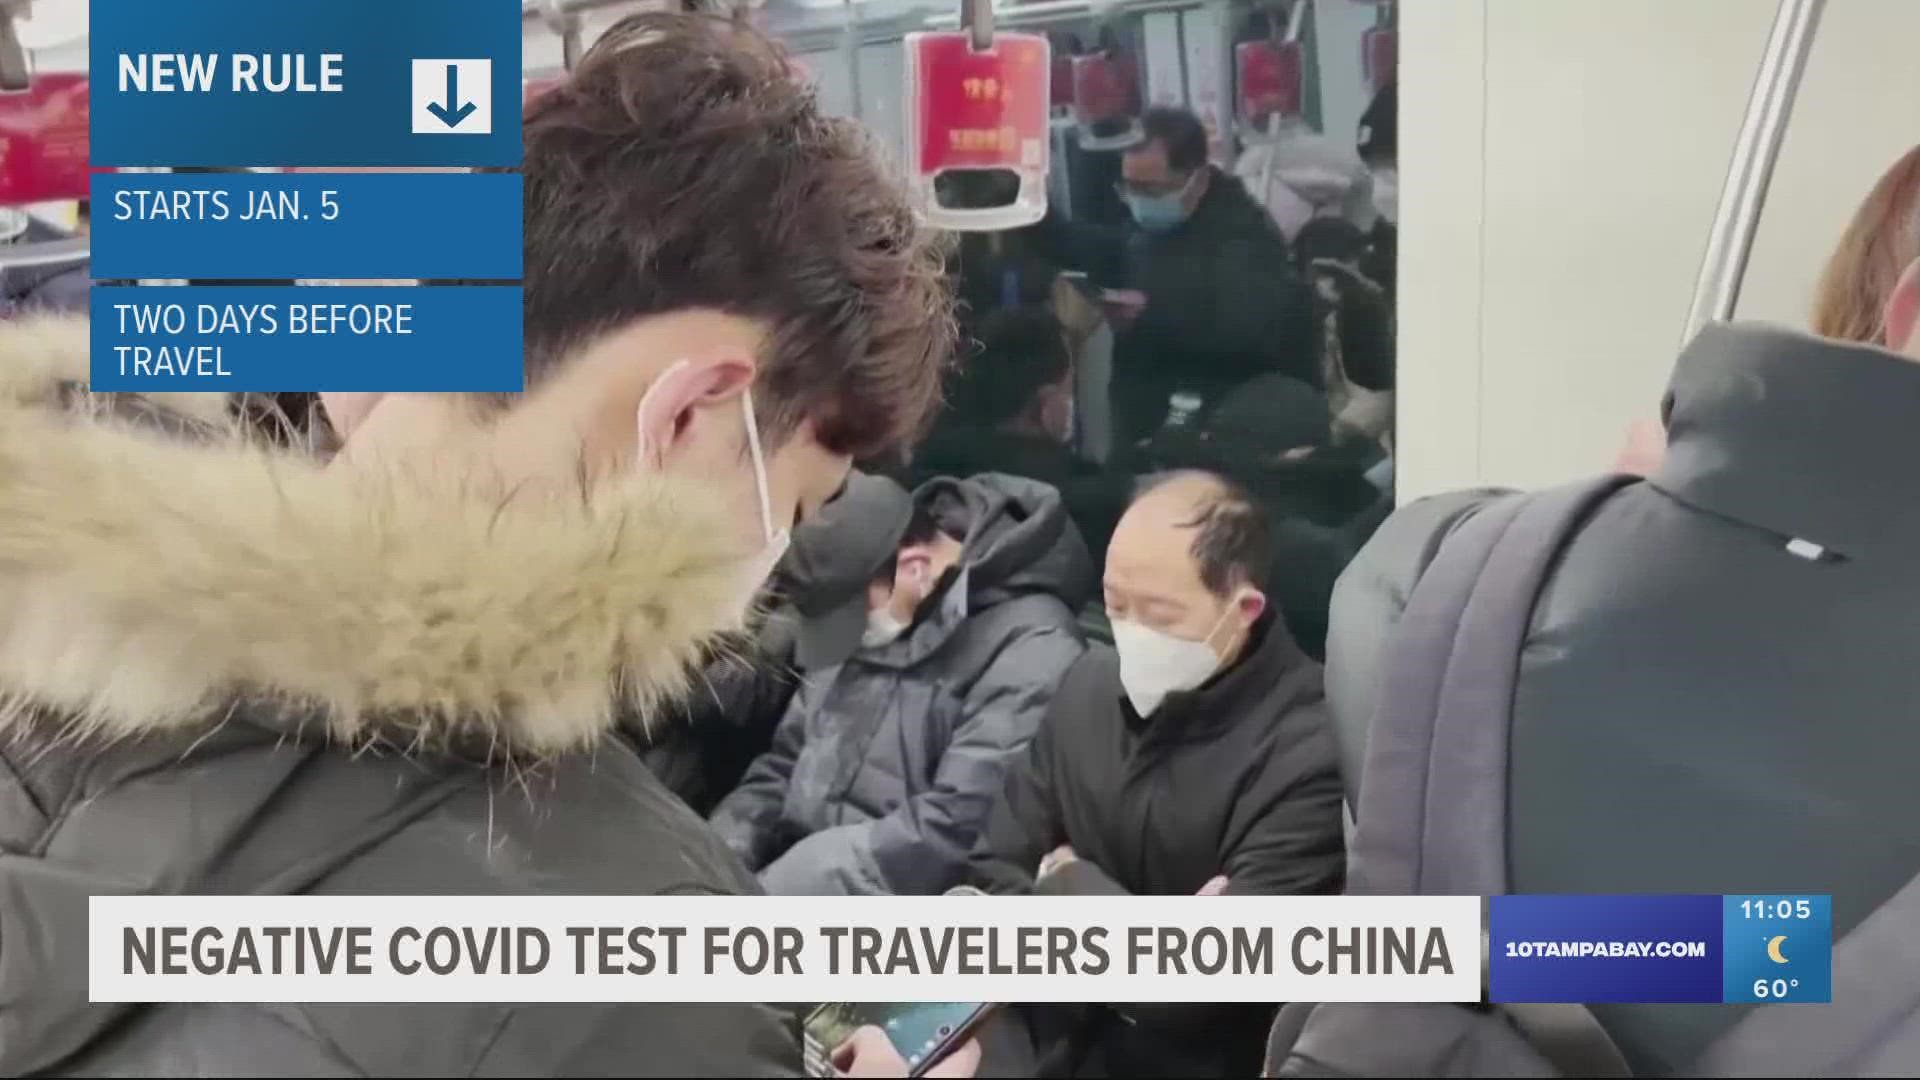 A recent increase in COVID-19 cases in China follows the country's rollback of strict anti-virus control.